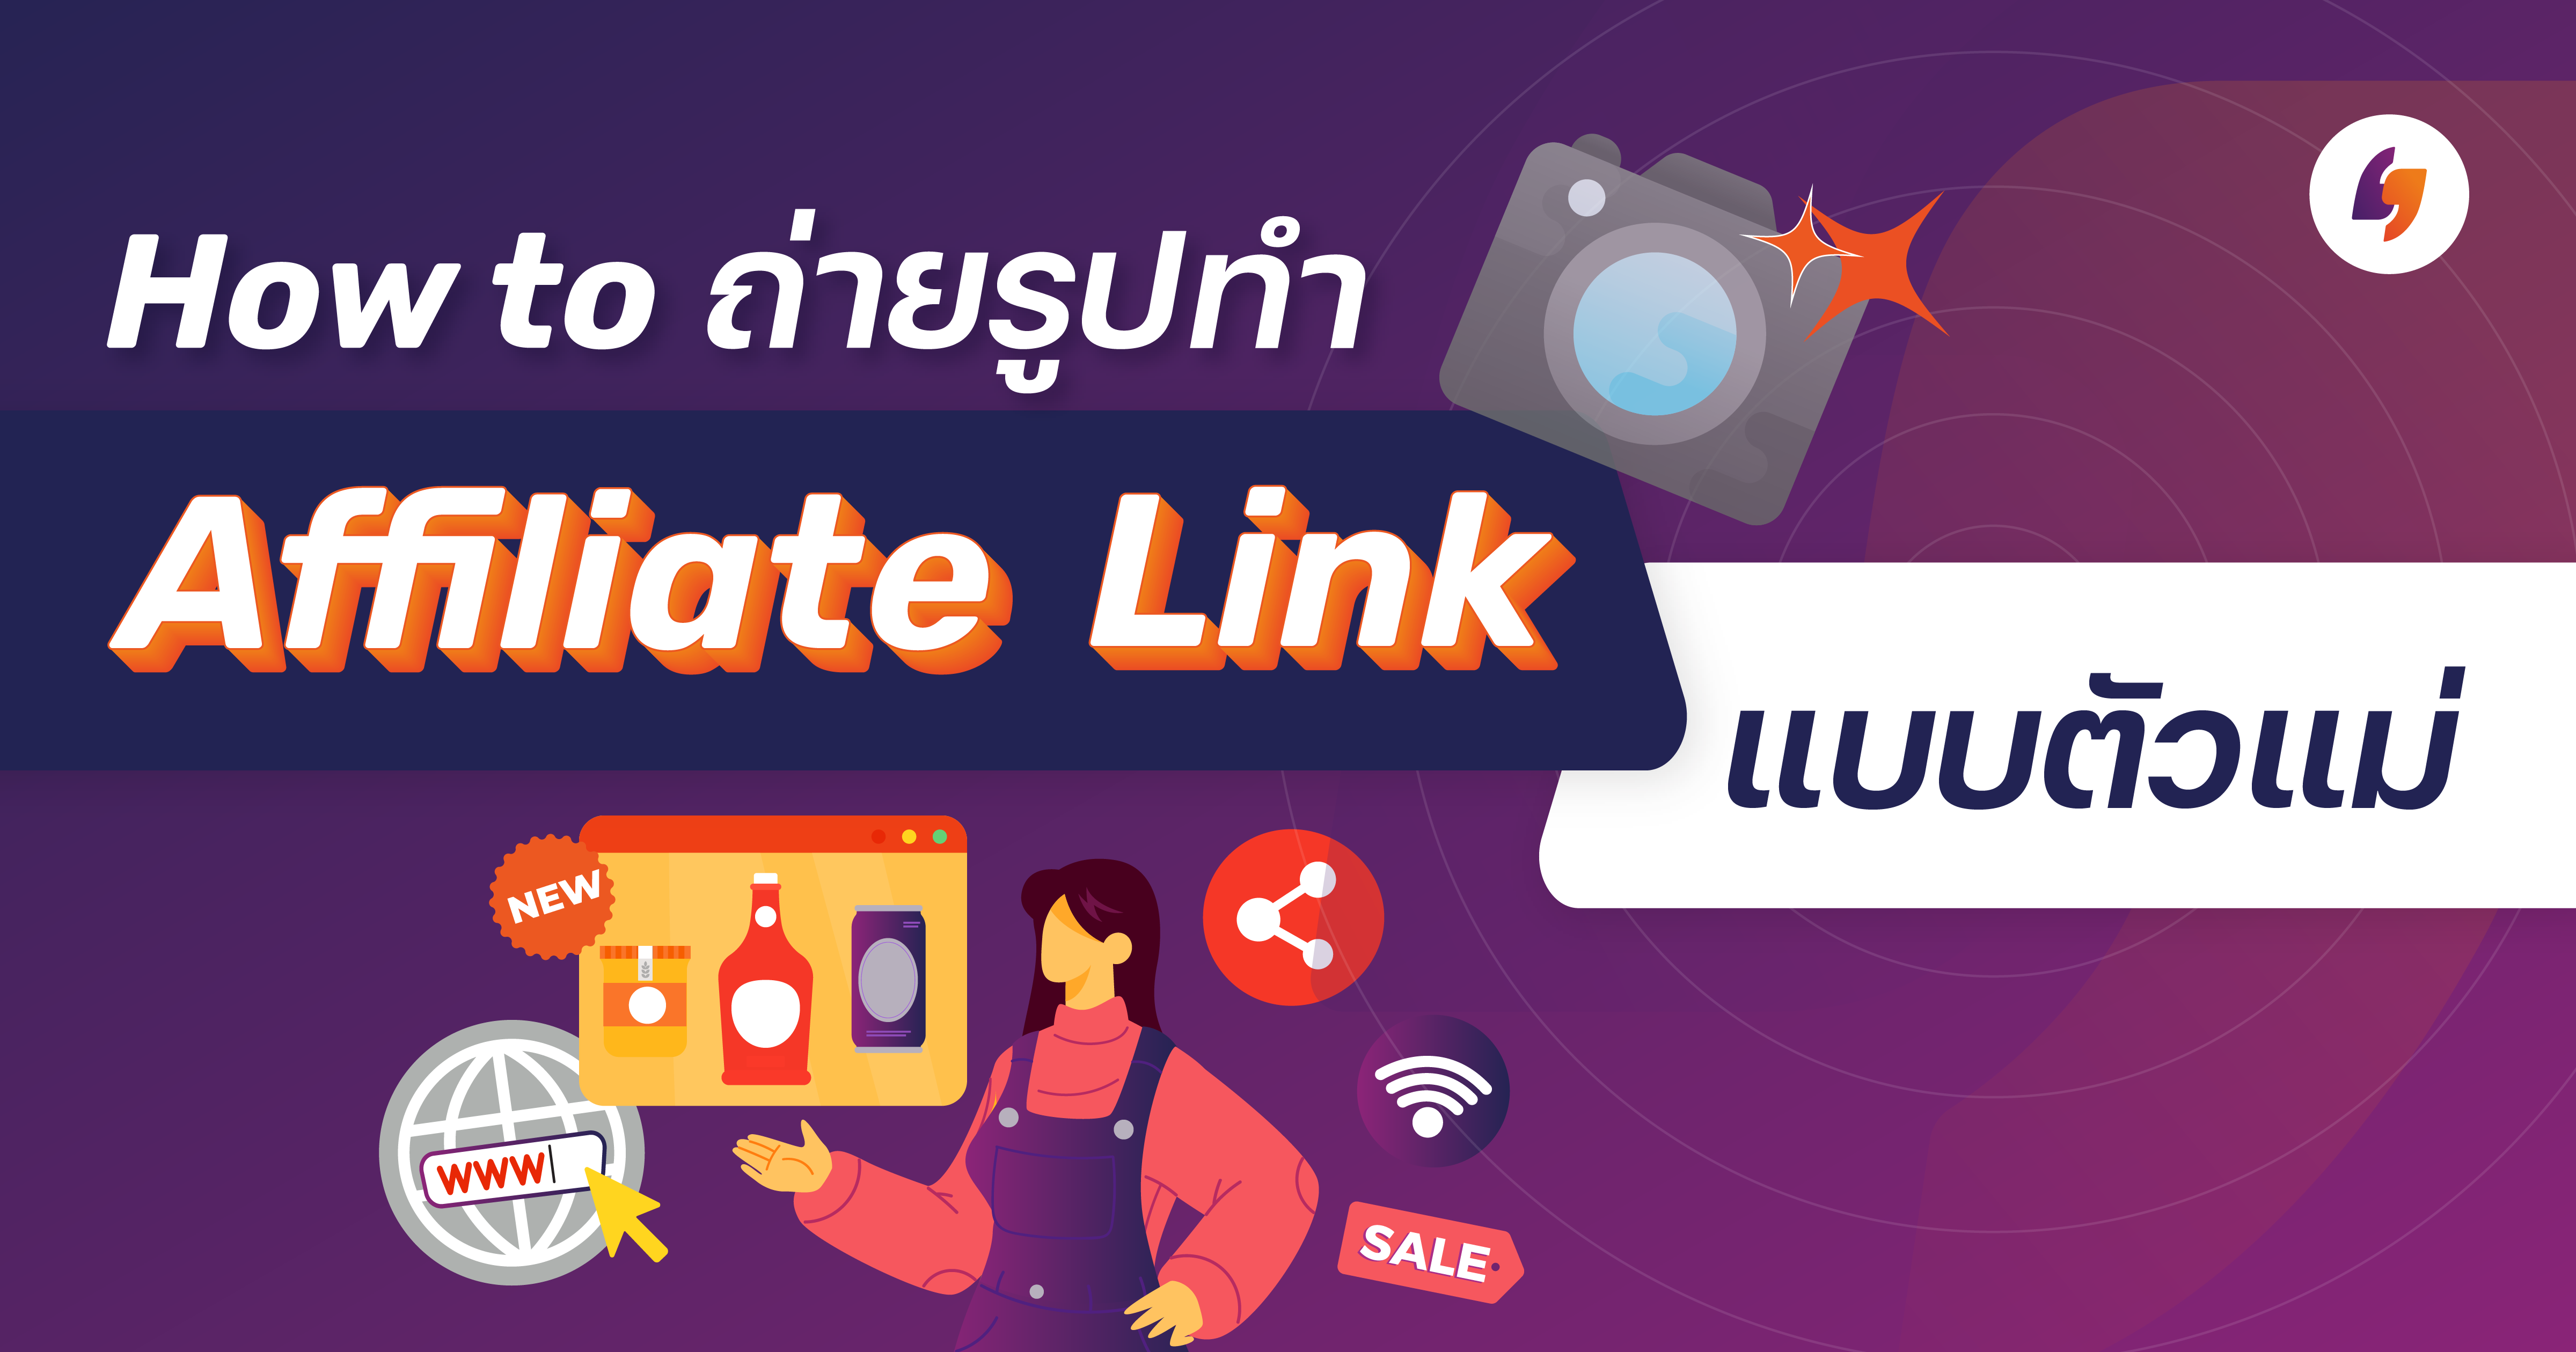 cover image for How to ถ่ายรูปทำ Affiliate Link แบบตัวแม่